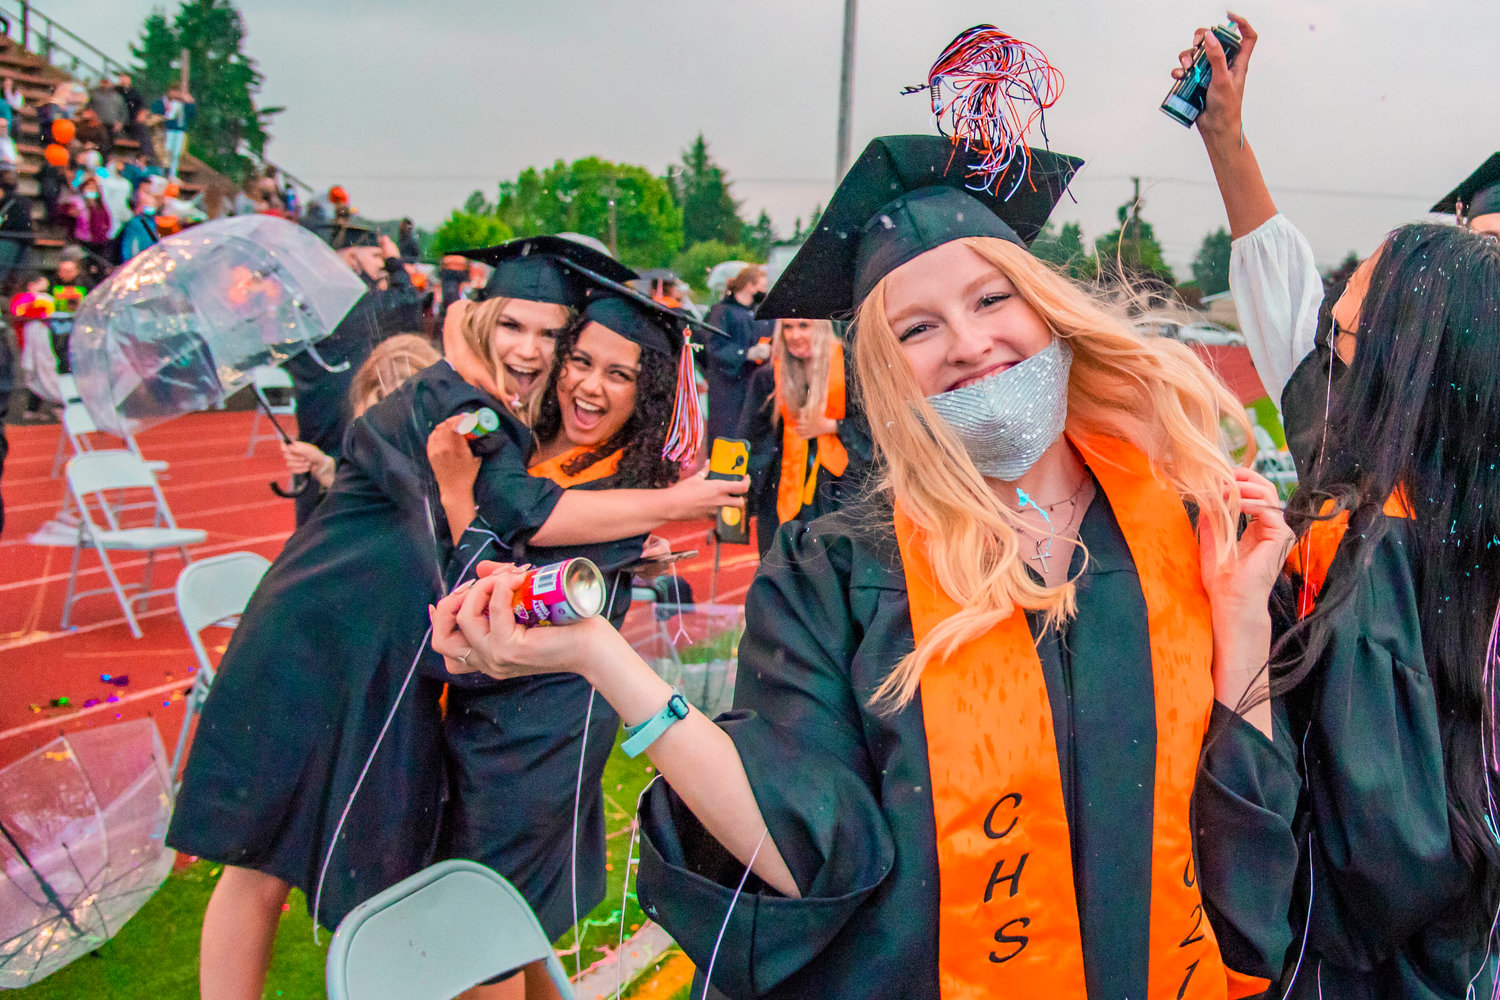 Centralia graduates celebrate with confetti, hugs, and Silly String after turning their tassels during a ceremony held Friday night at Tiger Stadium.